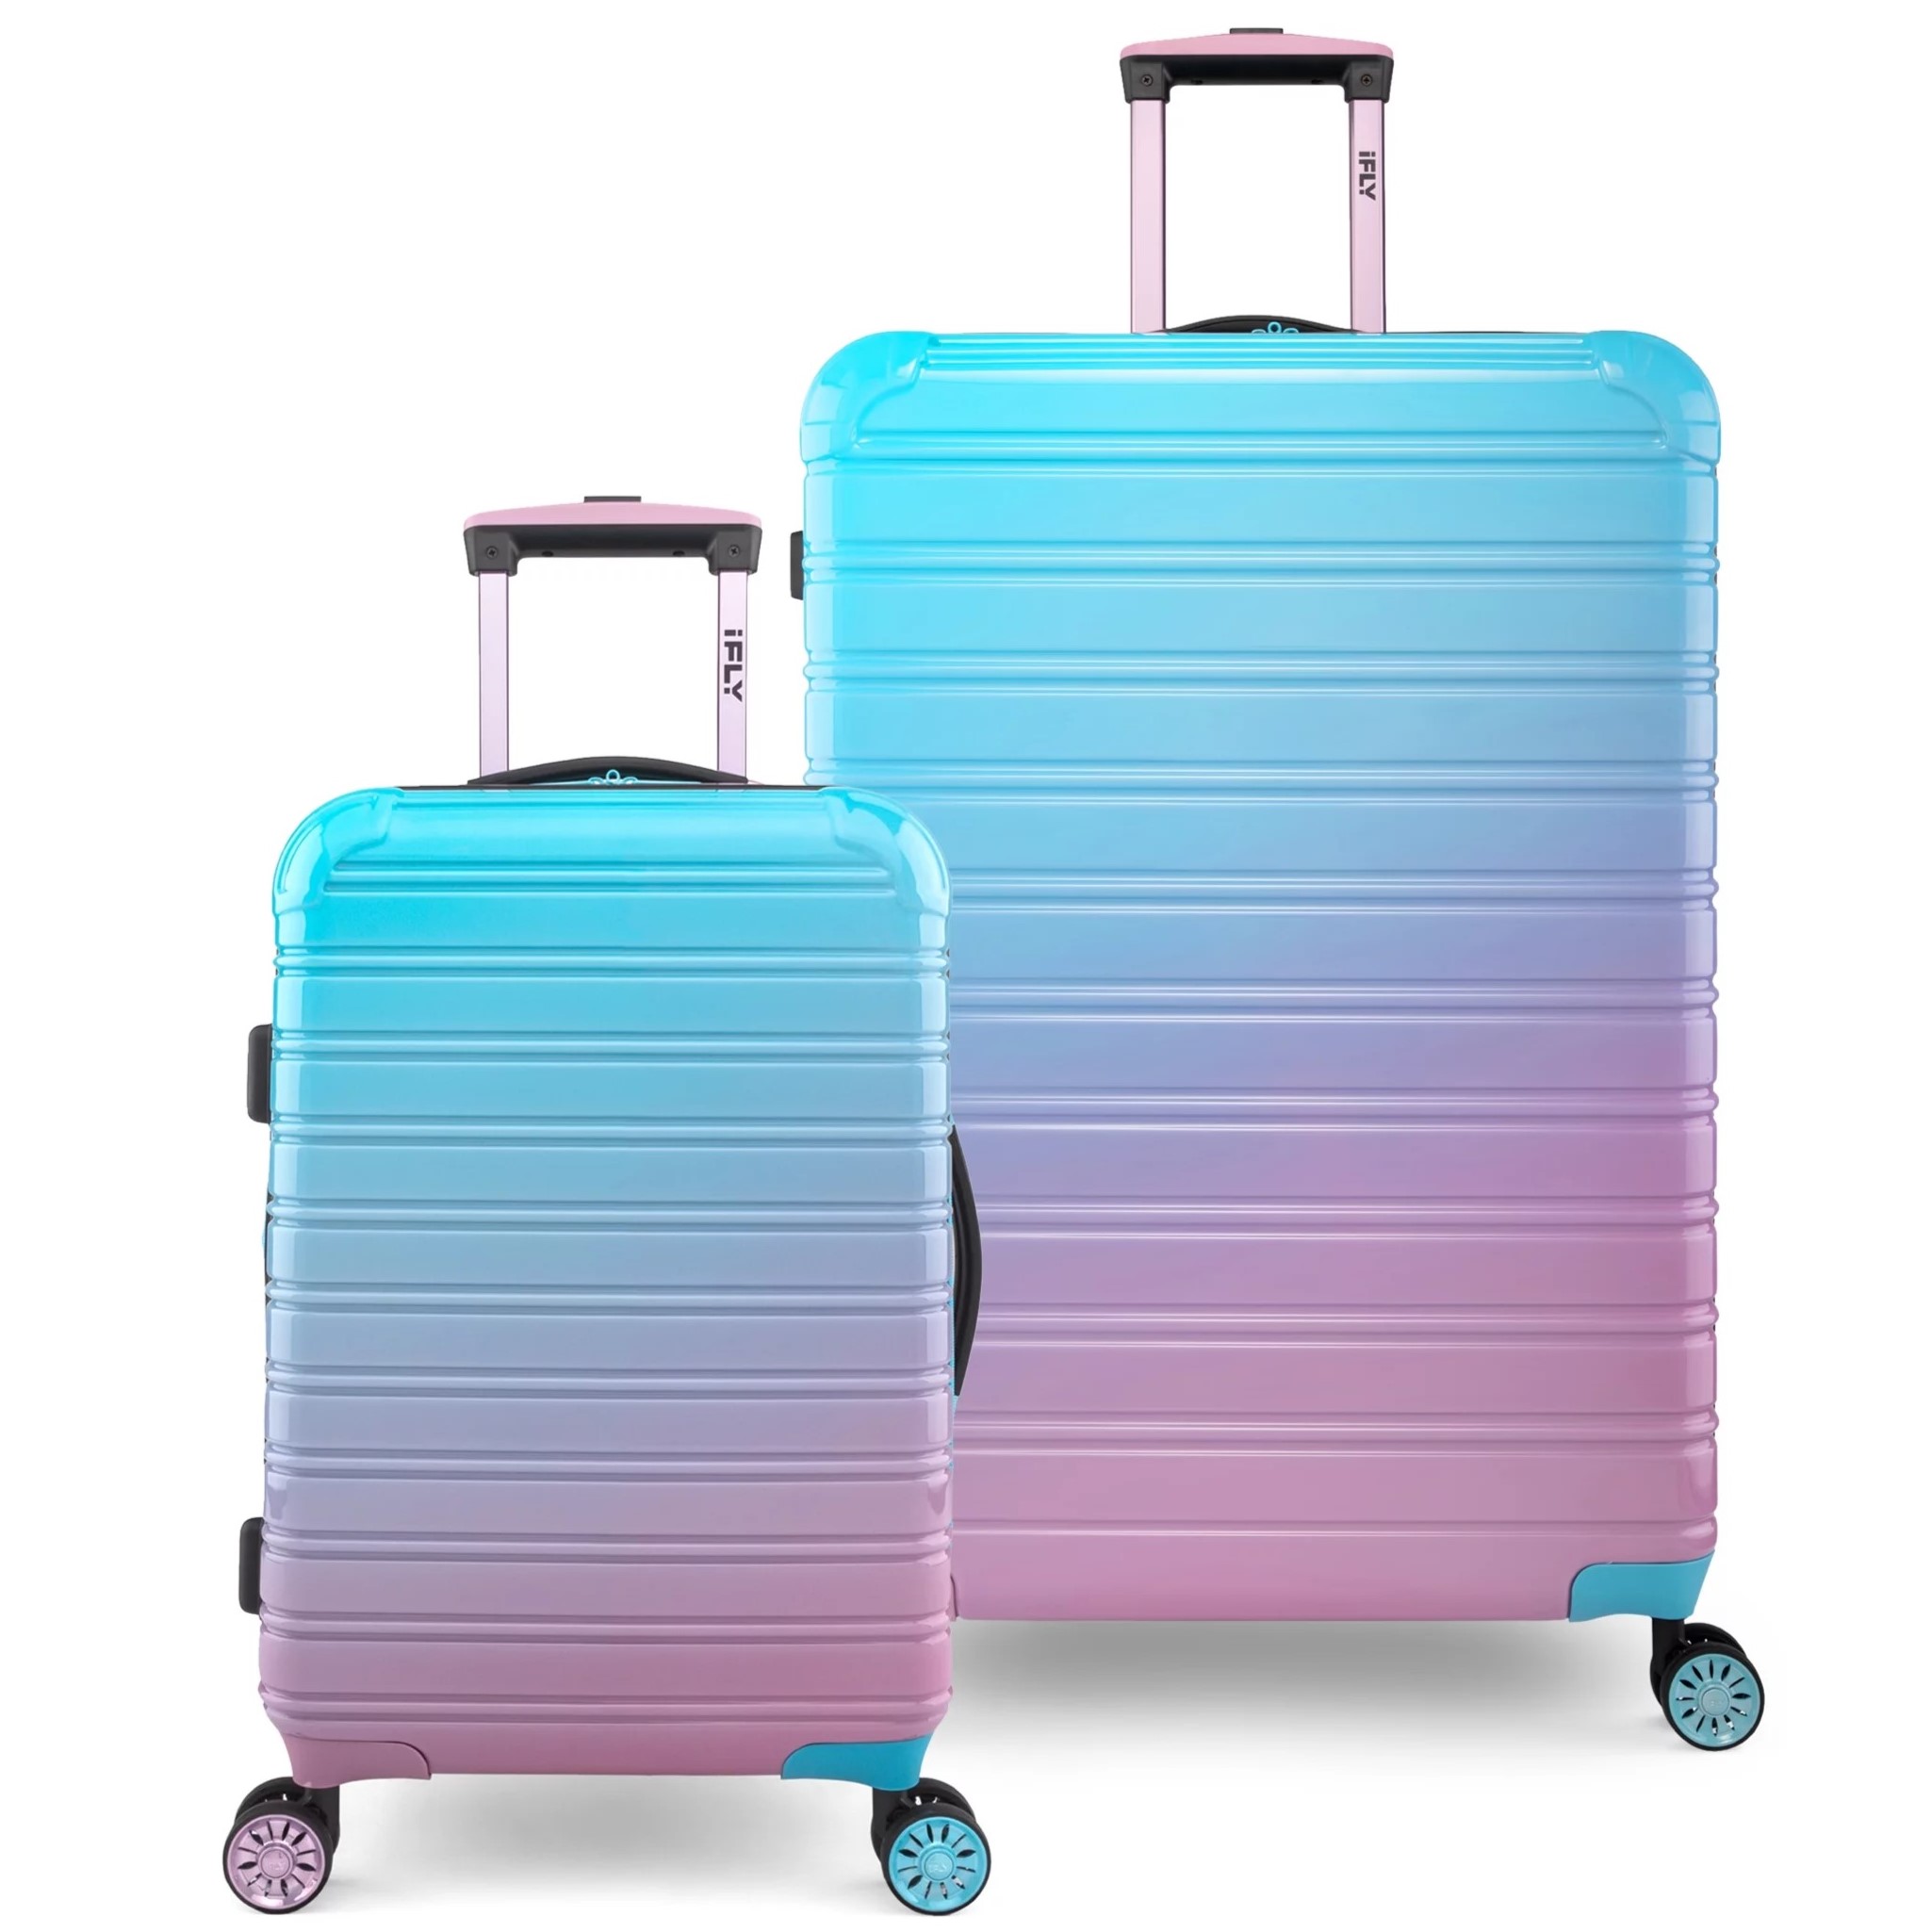 VALI DU LỊCH IFLY FIBERTECH OMBRE HARDSIDE LUGGAGE IN COTTON CANDY 9